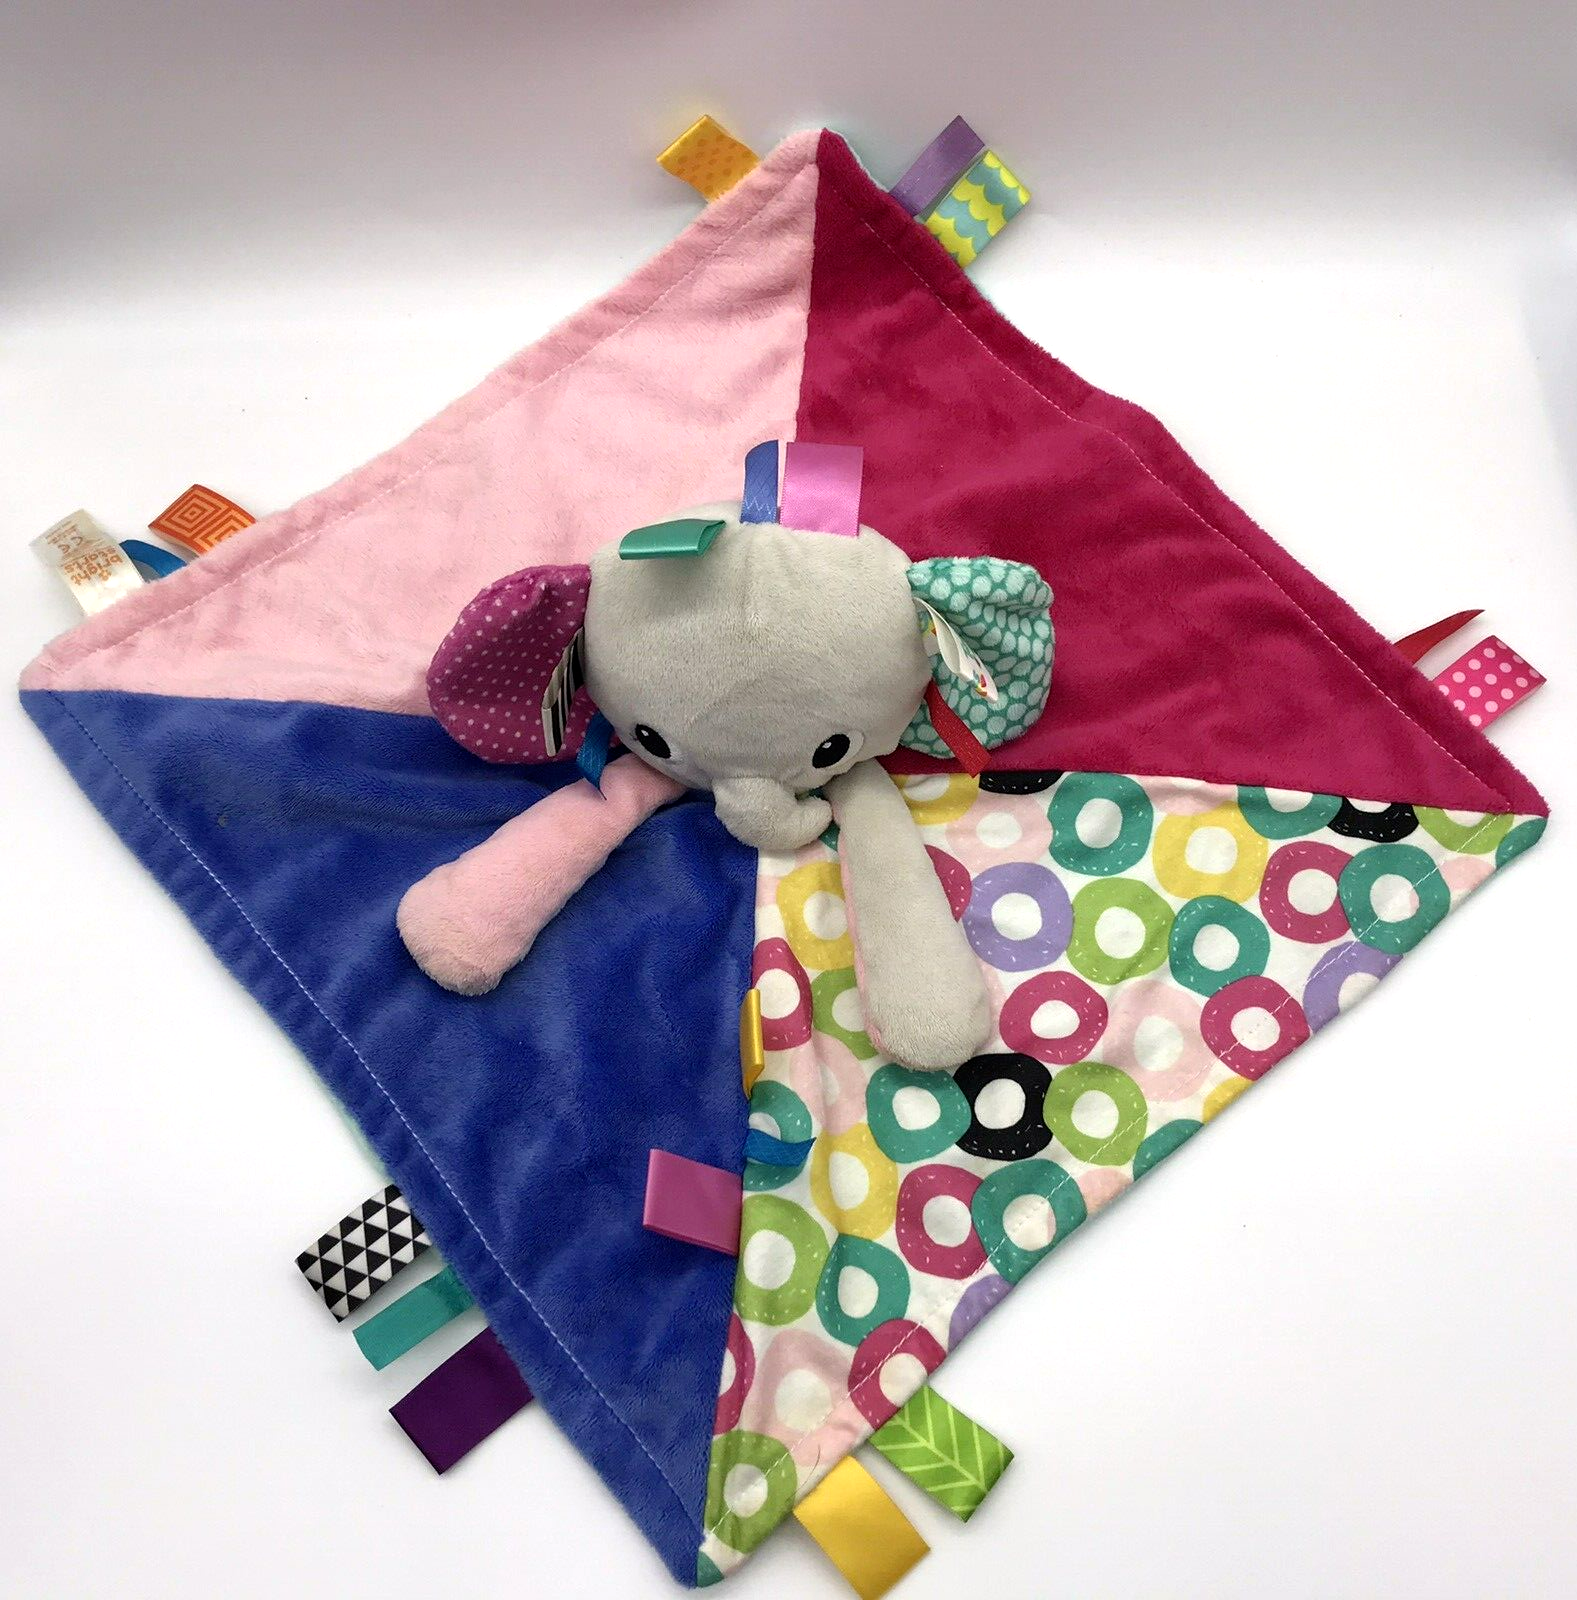 Taggies Elephant Lovey Security Blanket Sensory Soother Bright Starts - $19.99